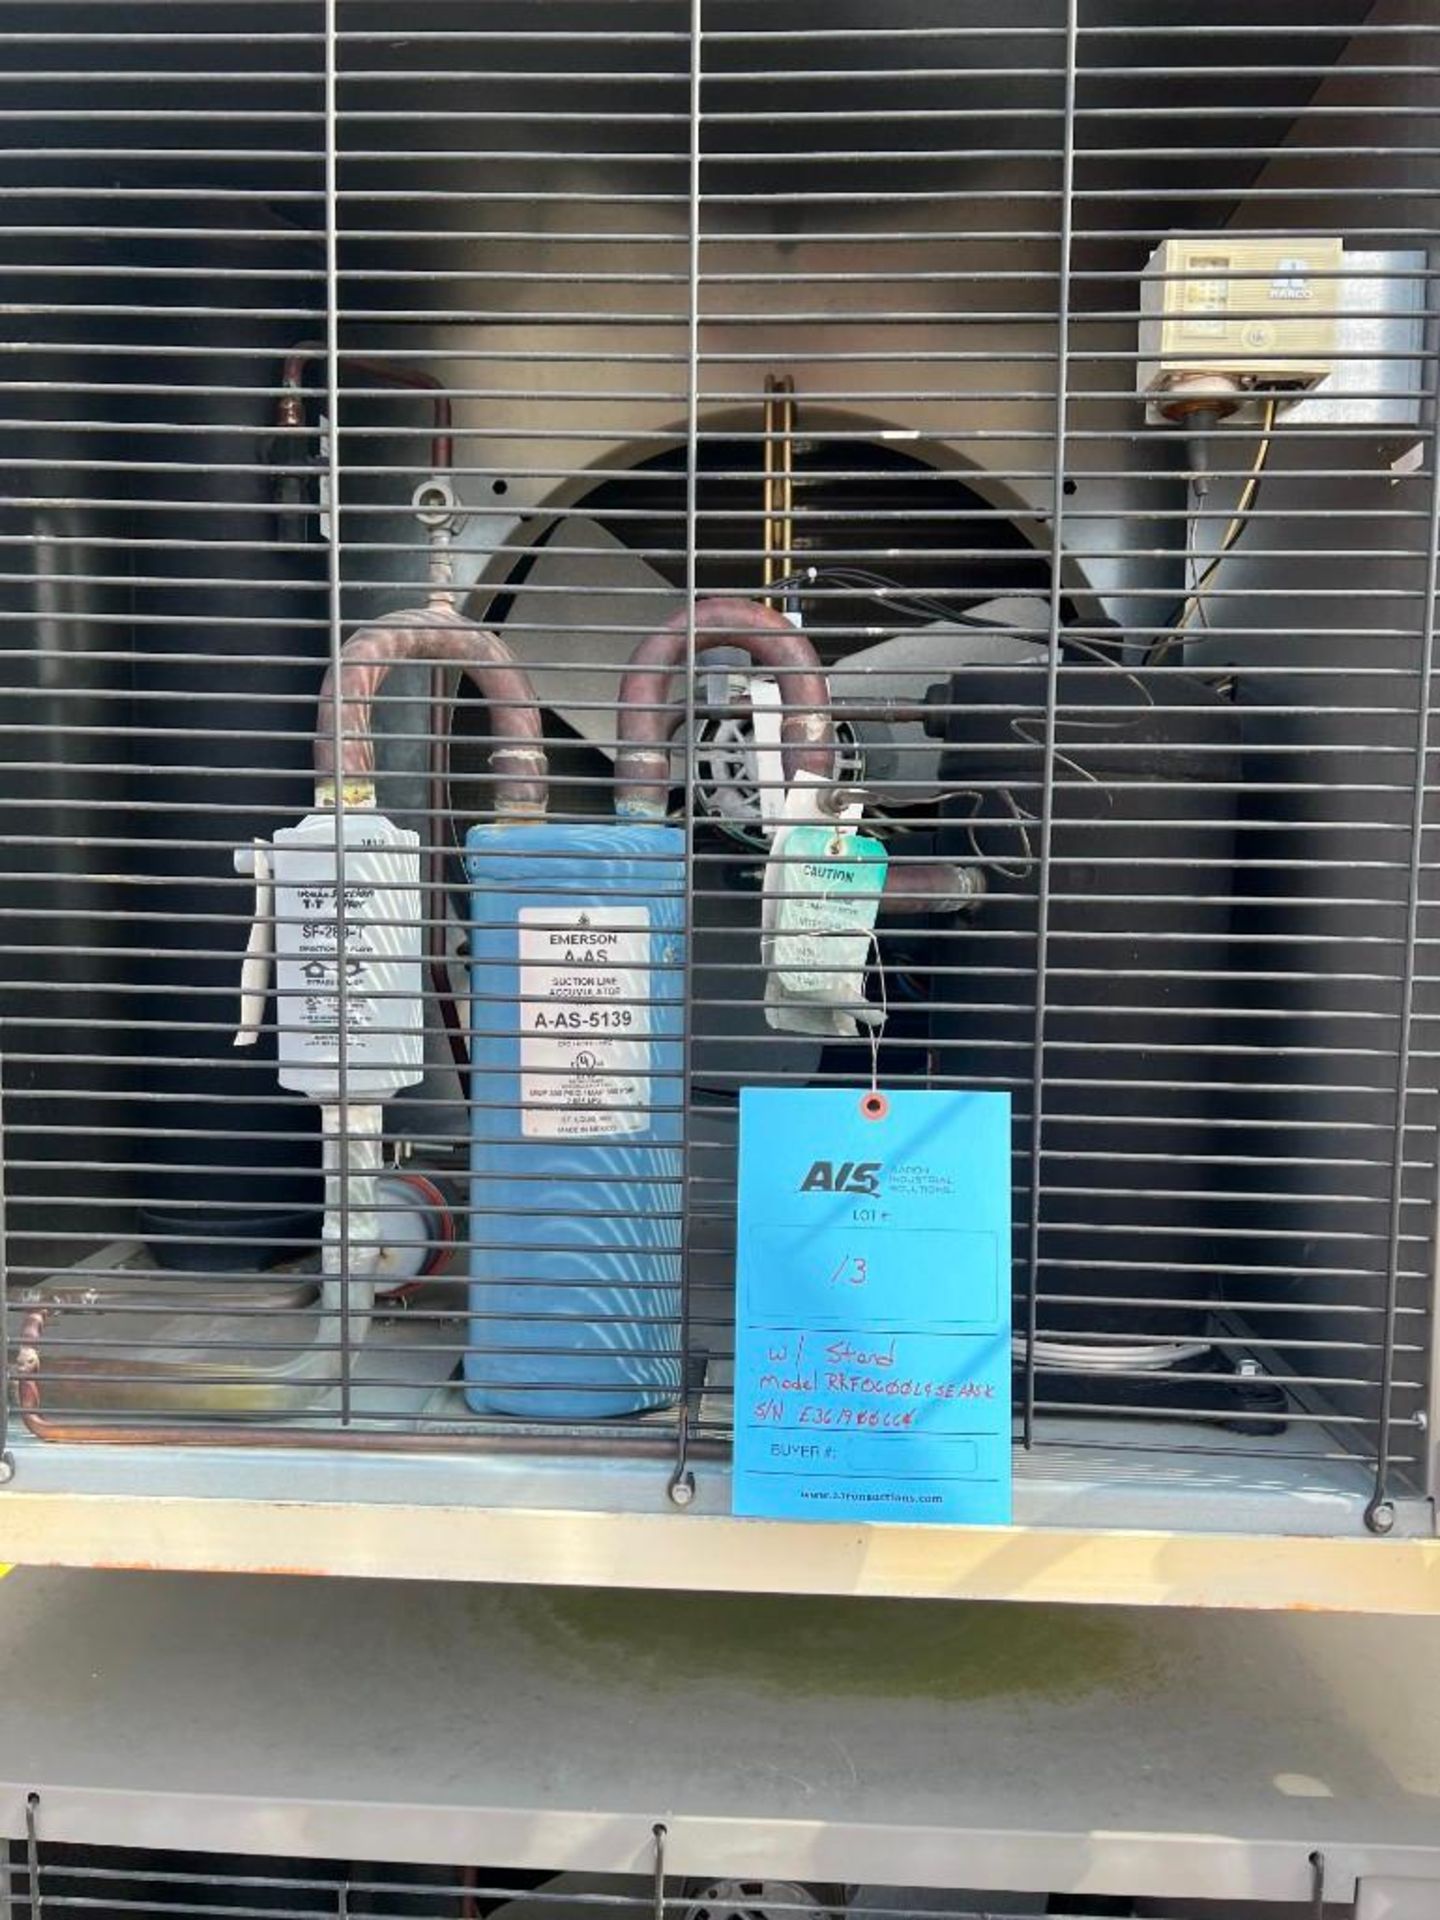 Heat Transfer Products Condensing Unit, Model RRFO600L4SEAASK, Catalog# FO600L4SEA, Serial# E3619006 - Image 8 of 12